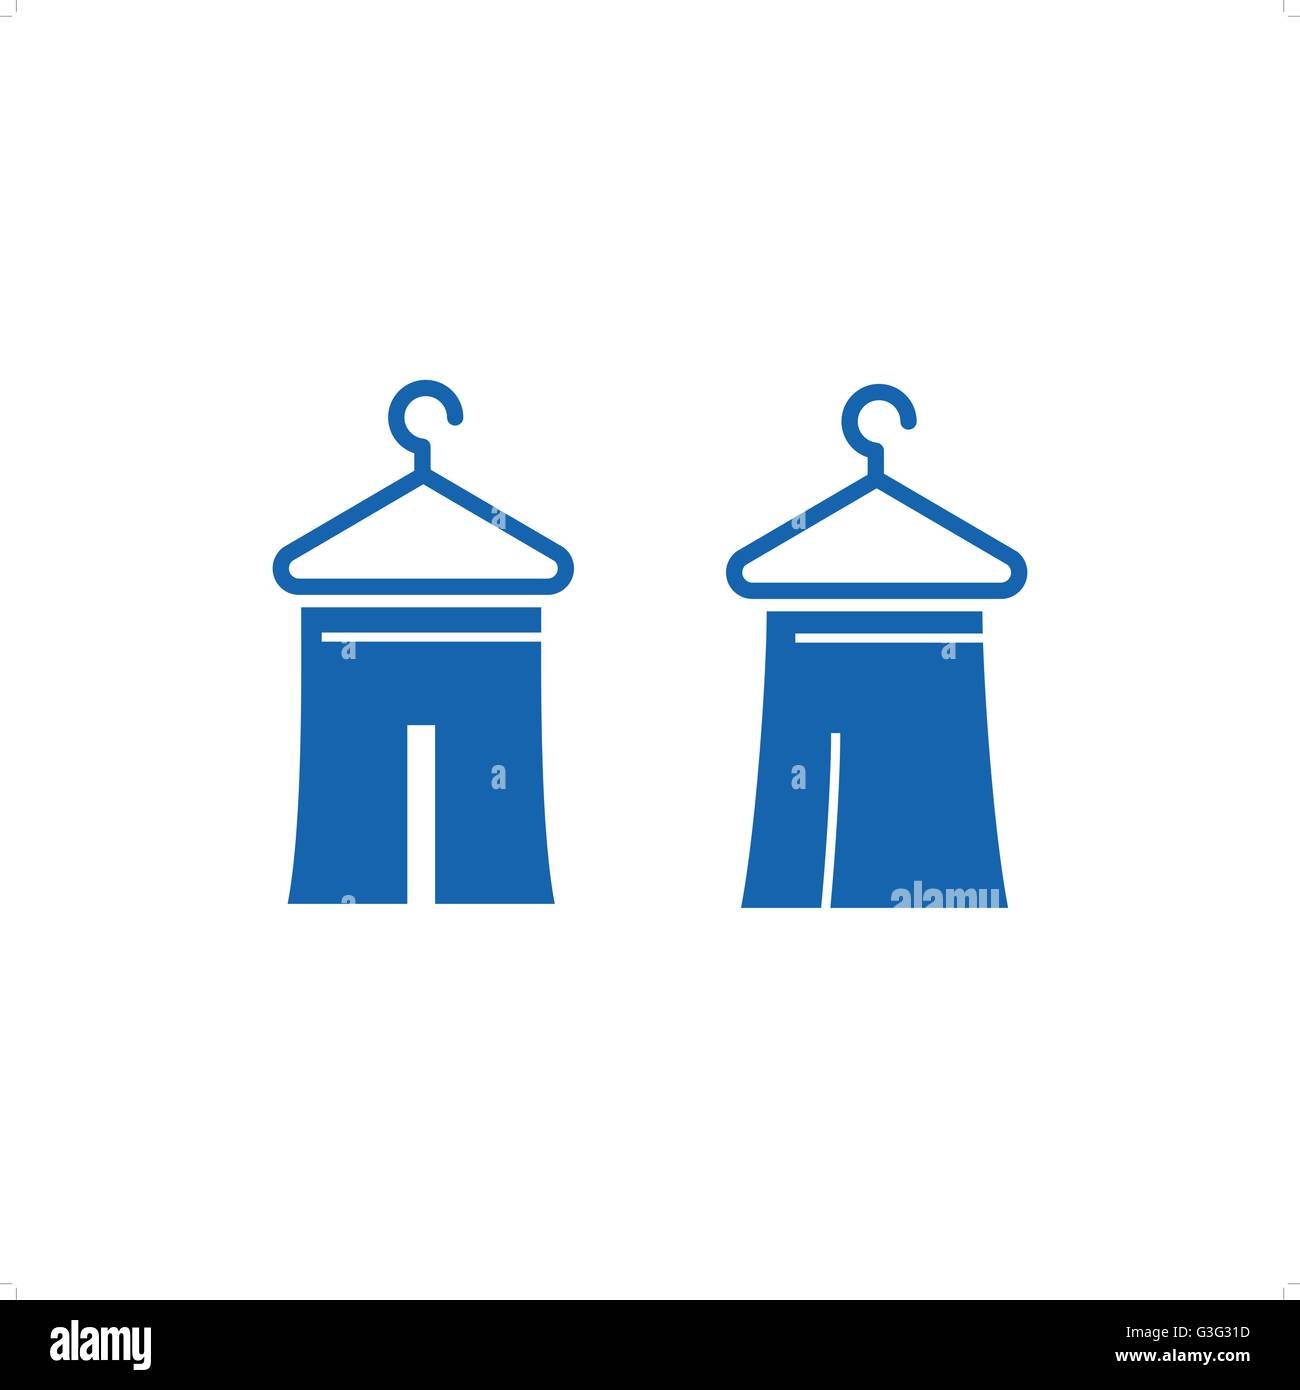 Blue T-Shirts clothing drawing with hanger vector illustration isolated on white background. Stock Vector